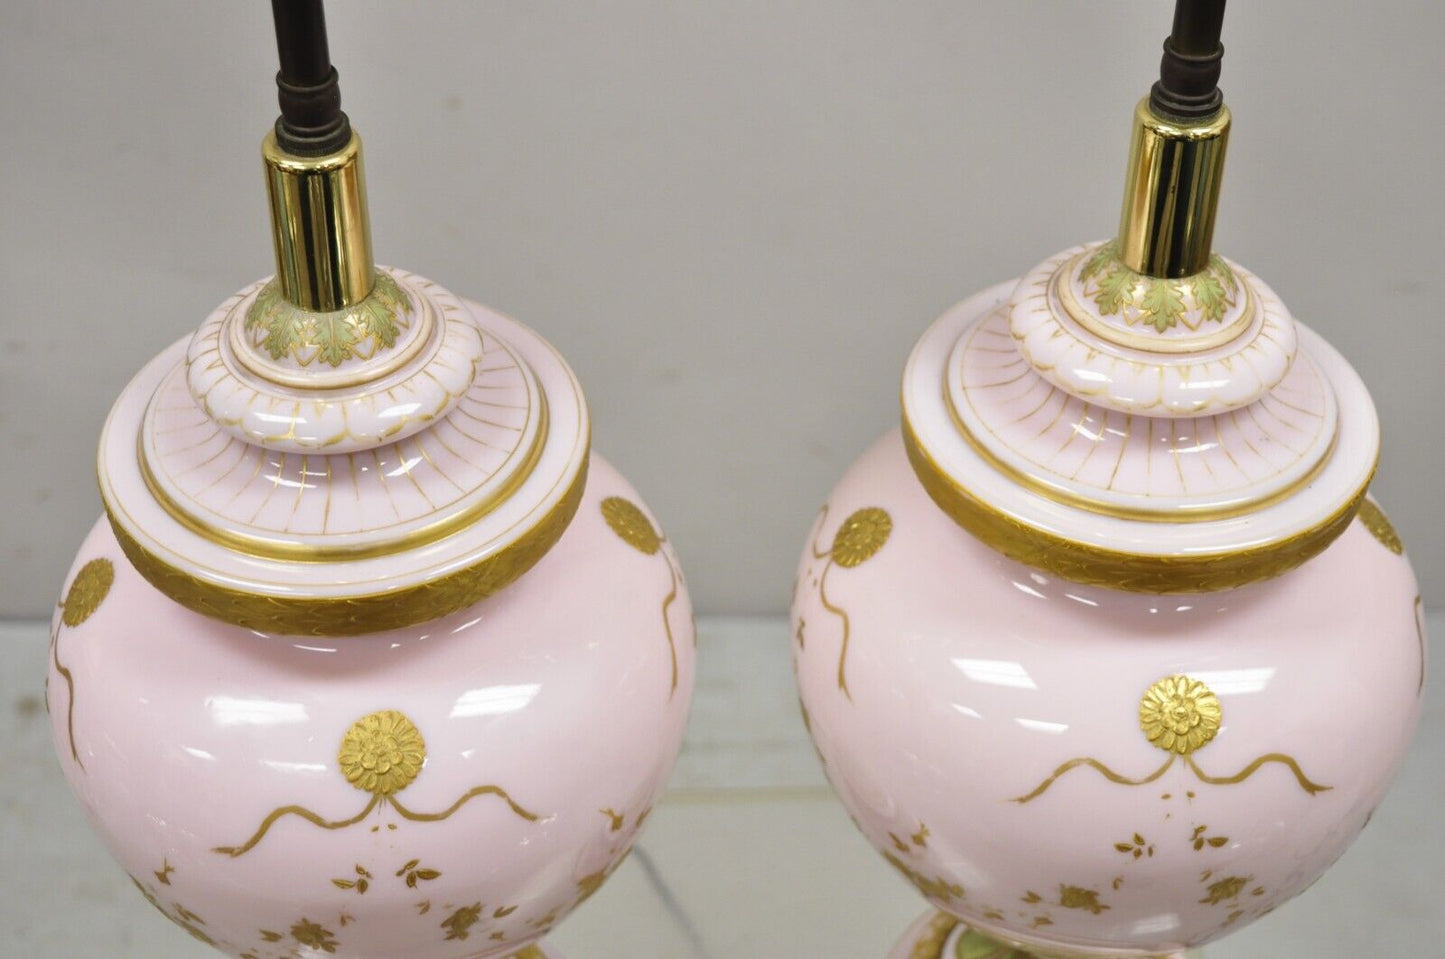 Antique French Pink Porcelain Hand Painted Bulbous Table Lamps - a Pair